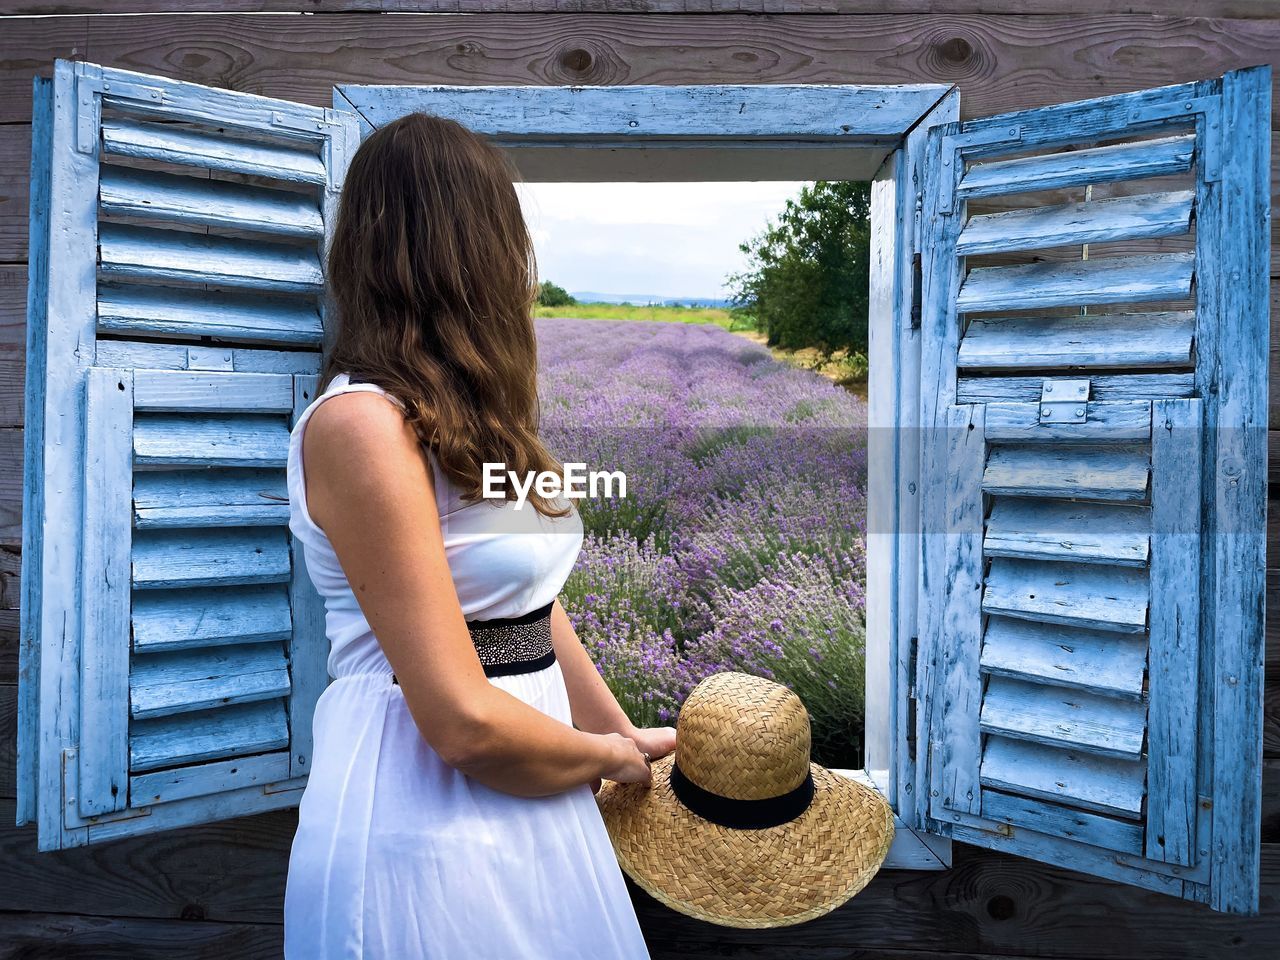 Woman in white dress looking out the open window at a field of lavender flowers